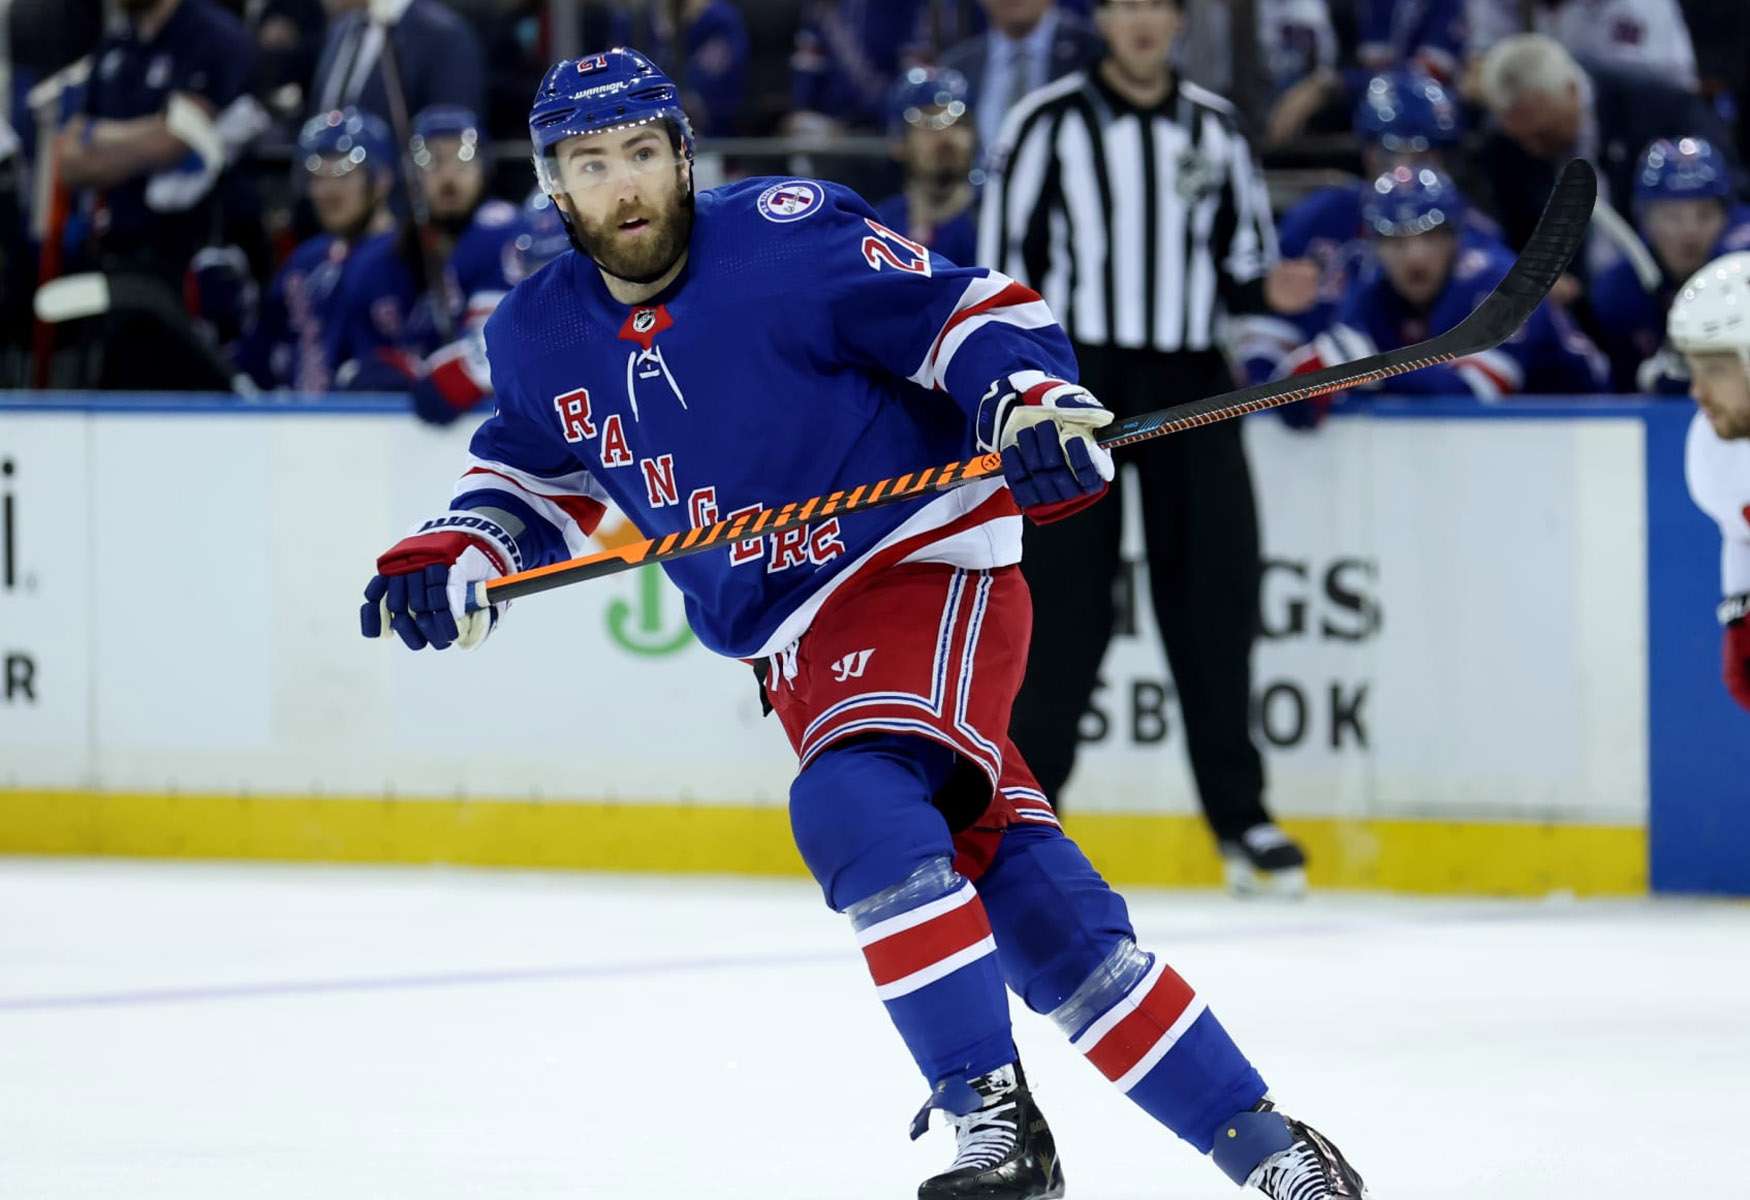 New York Rangers’ Barclay Goodrow Takes A Puck To The Face, Loses Tooth